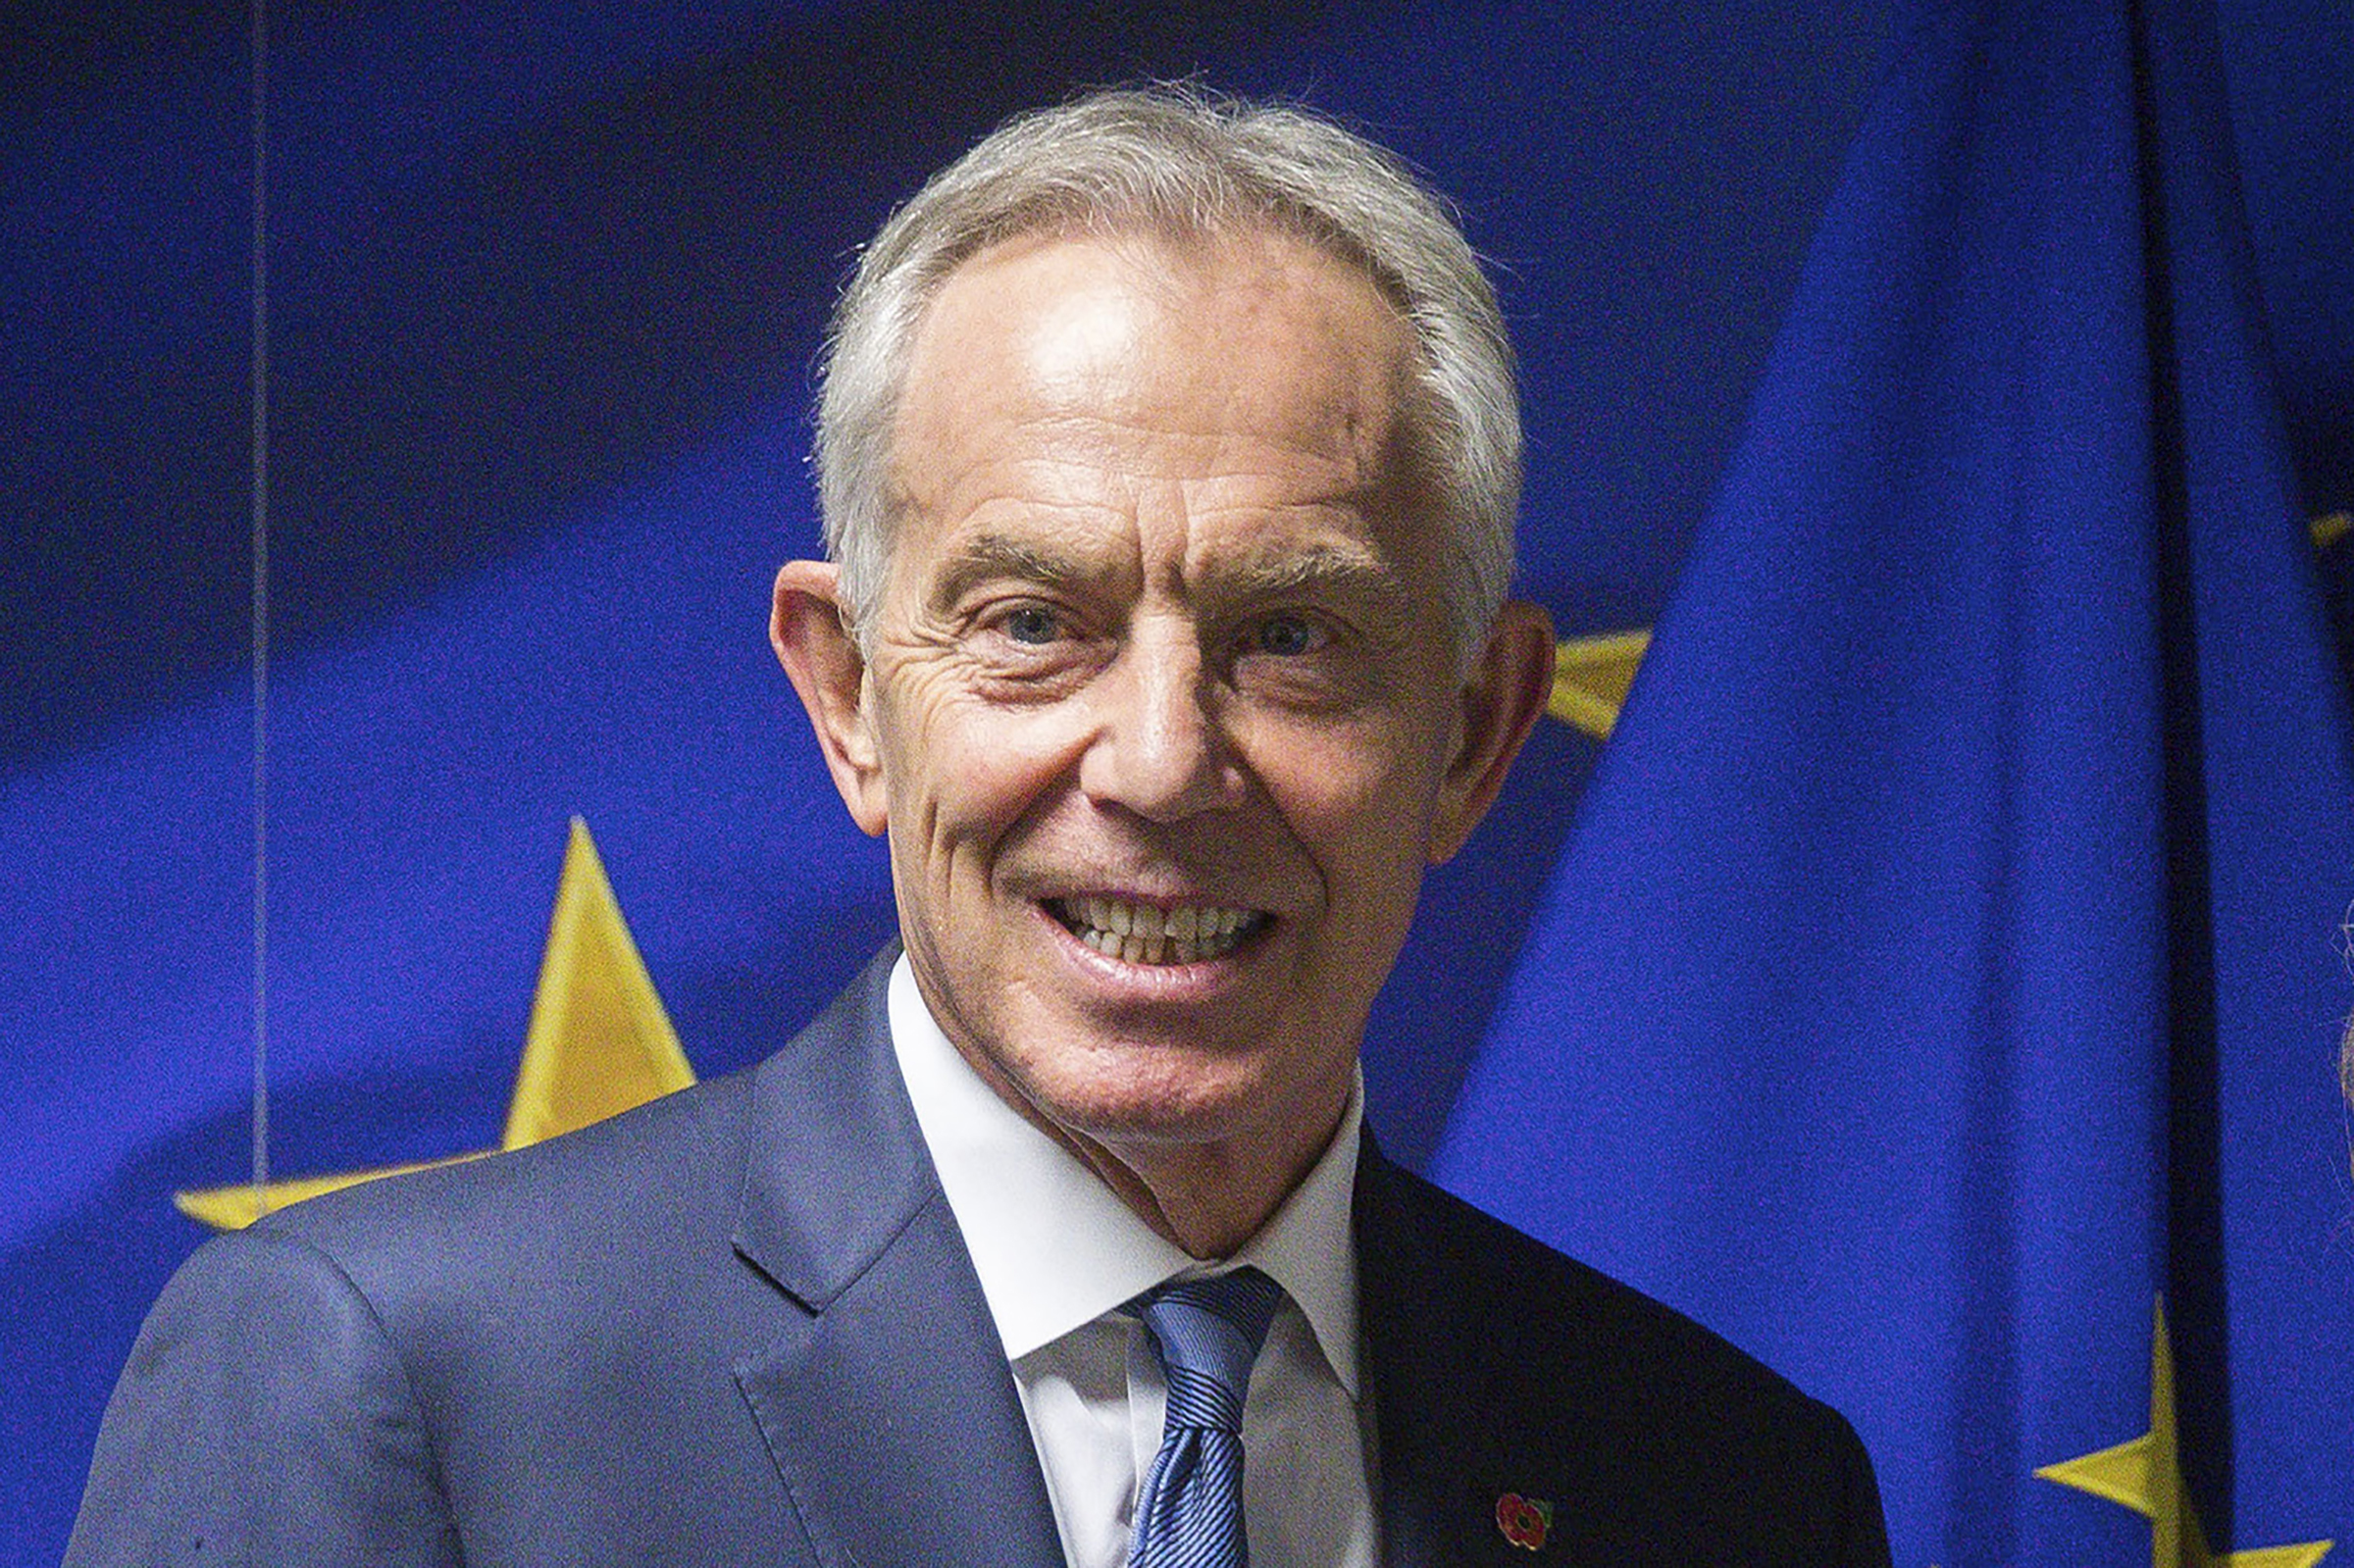 FILE - Former British Prime Minister Tony Blair is shown ahead of a meeting at the EU Charlemagne building in Brussels, in this Wednesday, Nov. 6, 2019, file photo. Hundreds of world leaders, powerful politicians, billionaires, celebrities, religious leaders and drug dealers have been stashing away their investments in mansions, exclusive beachfront property, yachts and other assets for the past quarter century, according to a review of nearly 12 million files obtained from 14 different firms located around the world. The report released Sunday, Oct. 3, 2021, by the International Consortium of Investigative Journalists involved 600 journalists from 150 media outlets in 117 countries. Former British Prime Minister Tony Blair is one of 330 current and former politicians identified as beneficiaries of the secret accounts. (Stephanie Lecocq/Pool via AP, File)